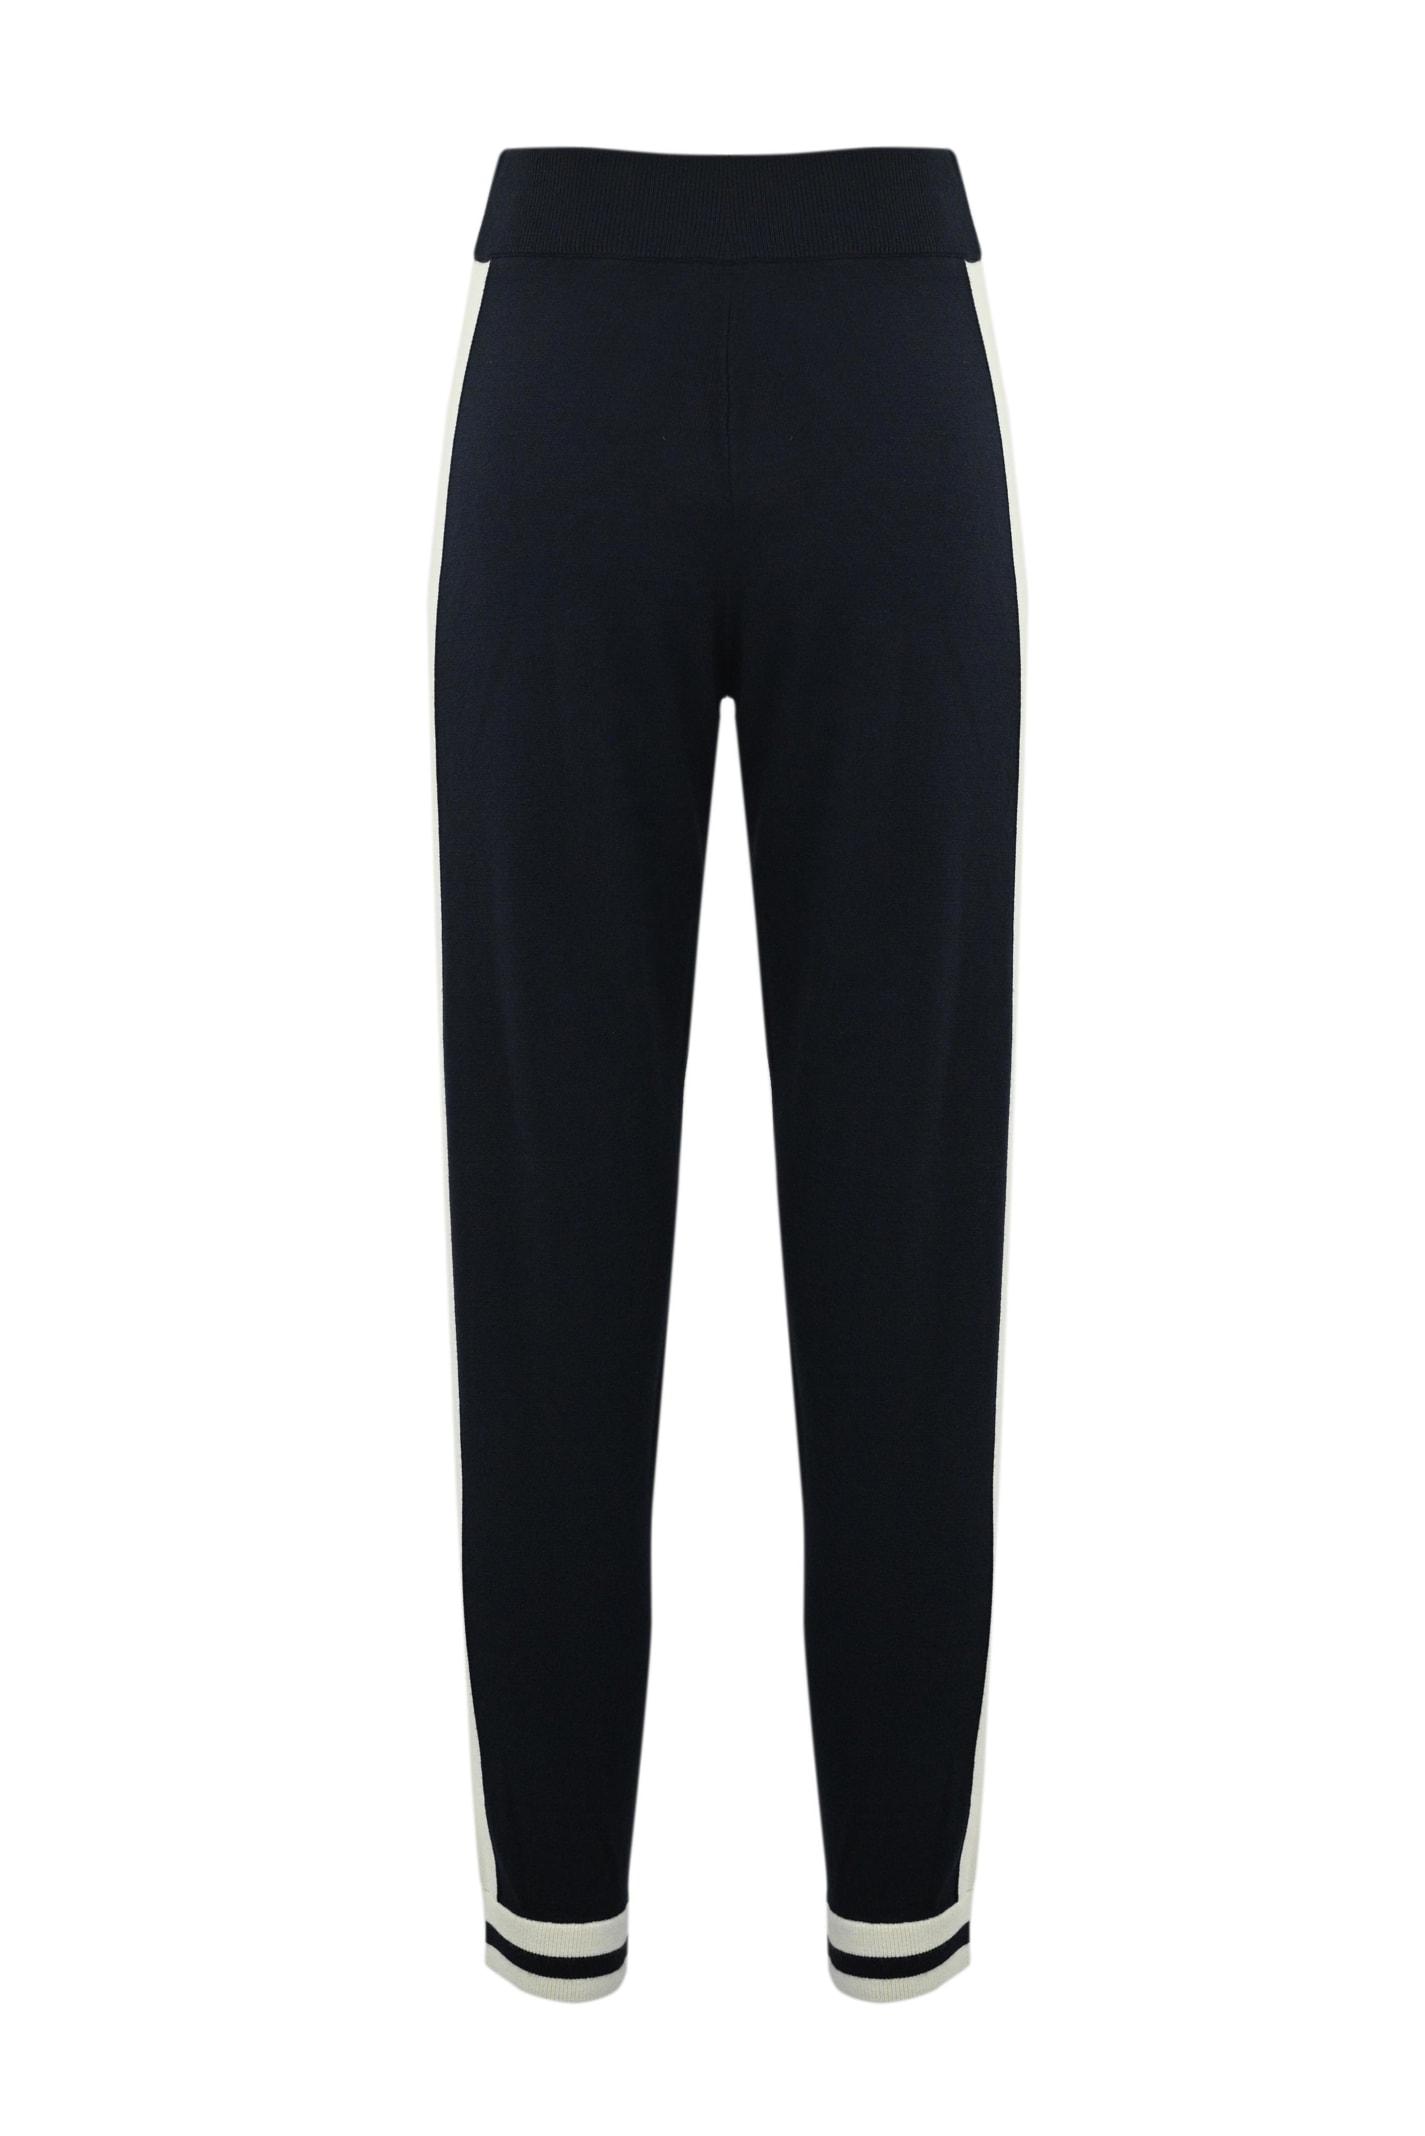 Weekend by Maxmara Knitted jogging Pants in Blue | Lyst